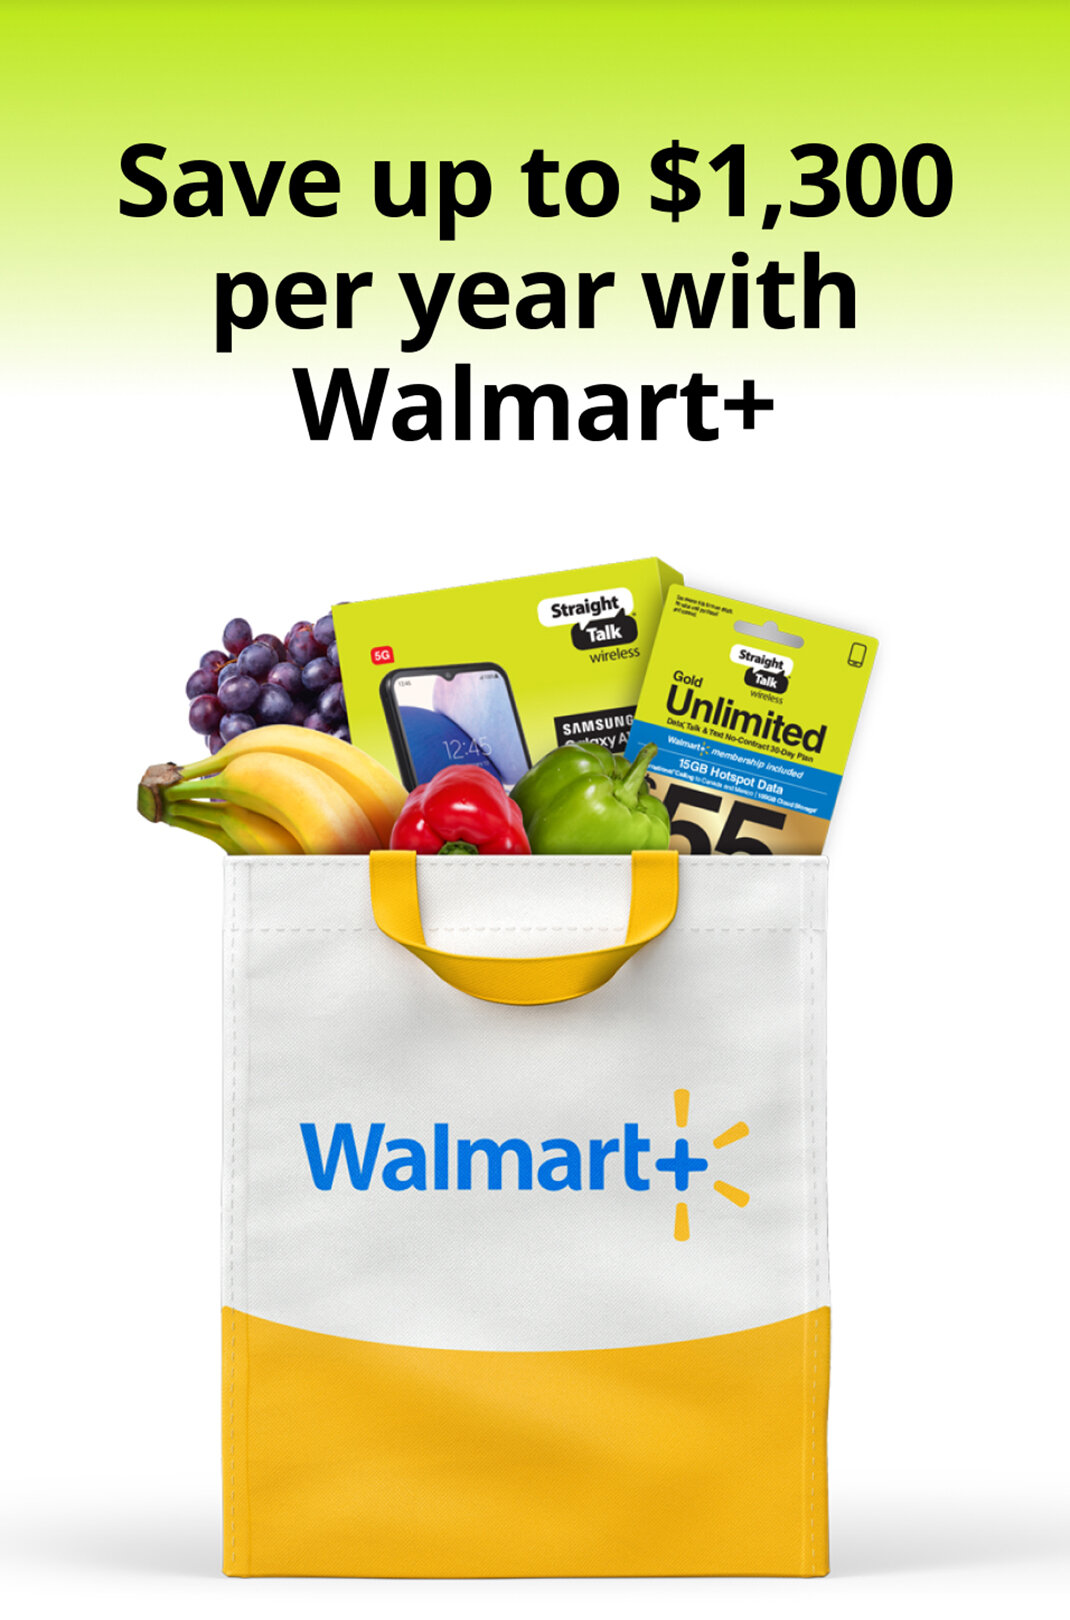 Save up to $1,300 per year with Walmart plus